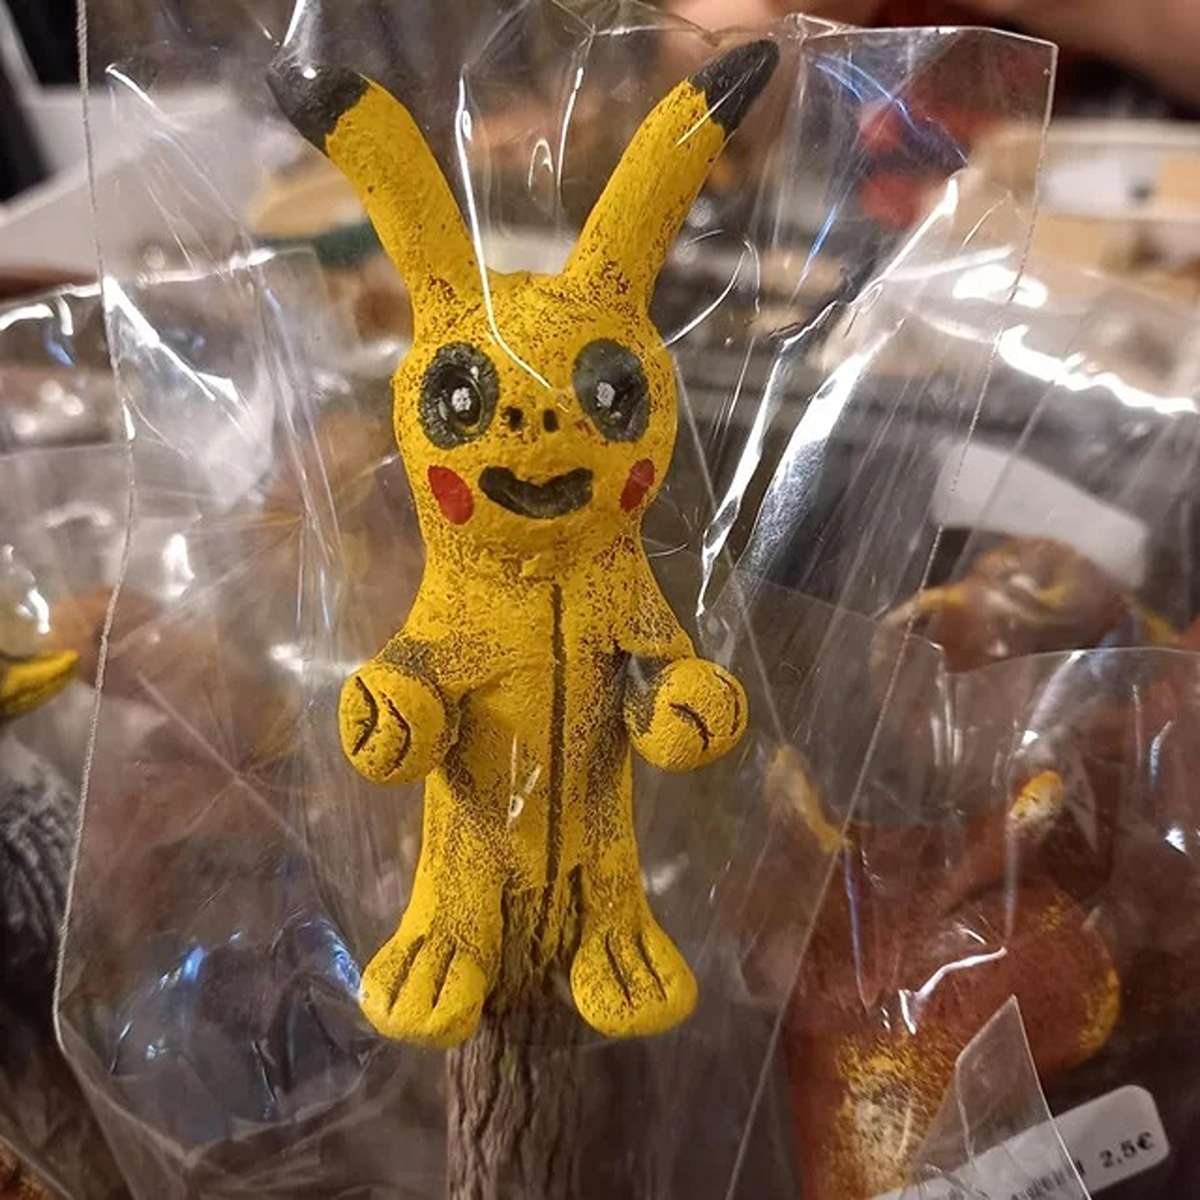 found this... creature in a store